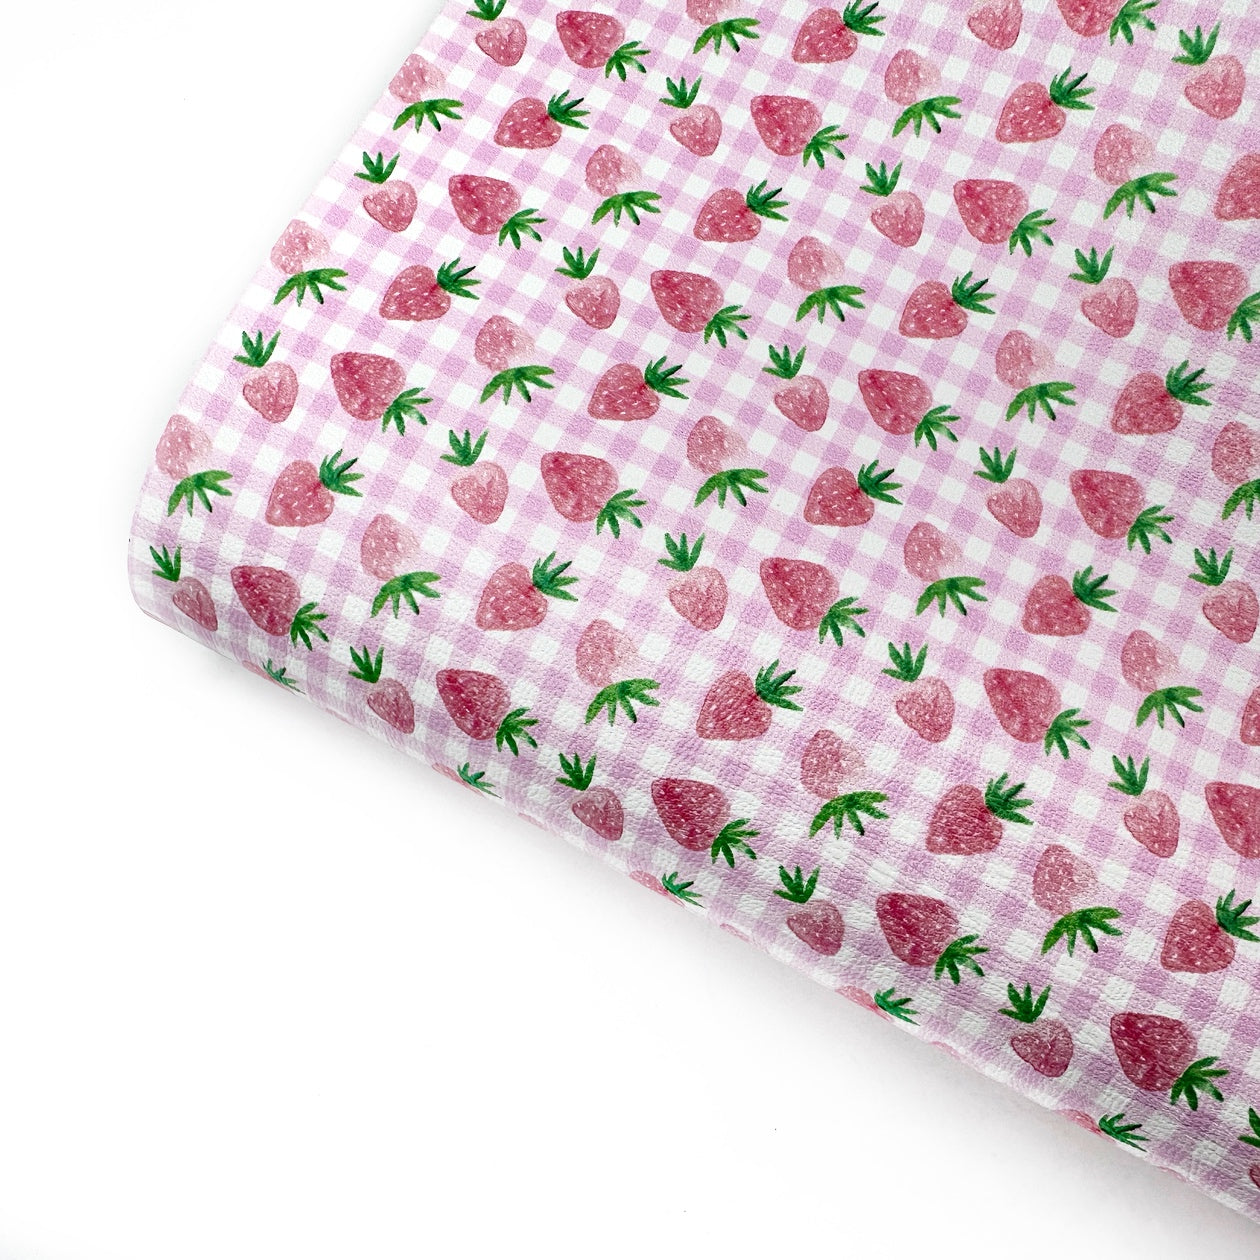 Strawberry Picnic Premium Faux Leather Fabric Sheets